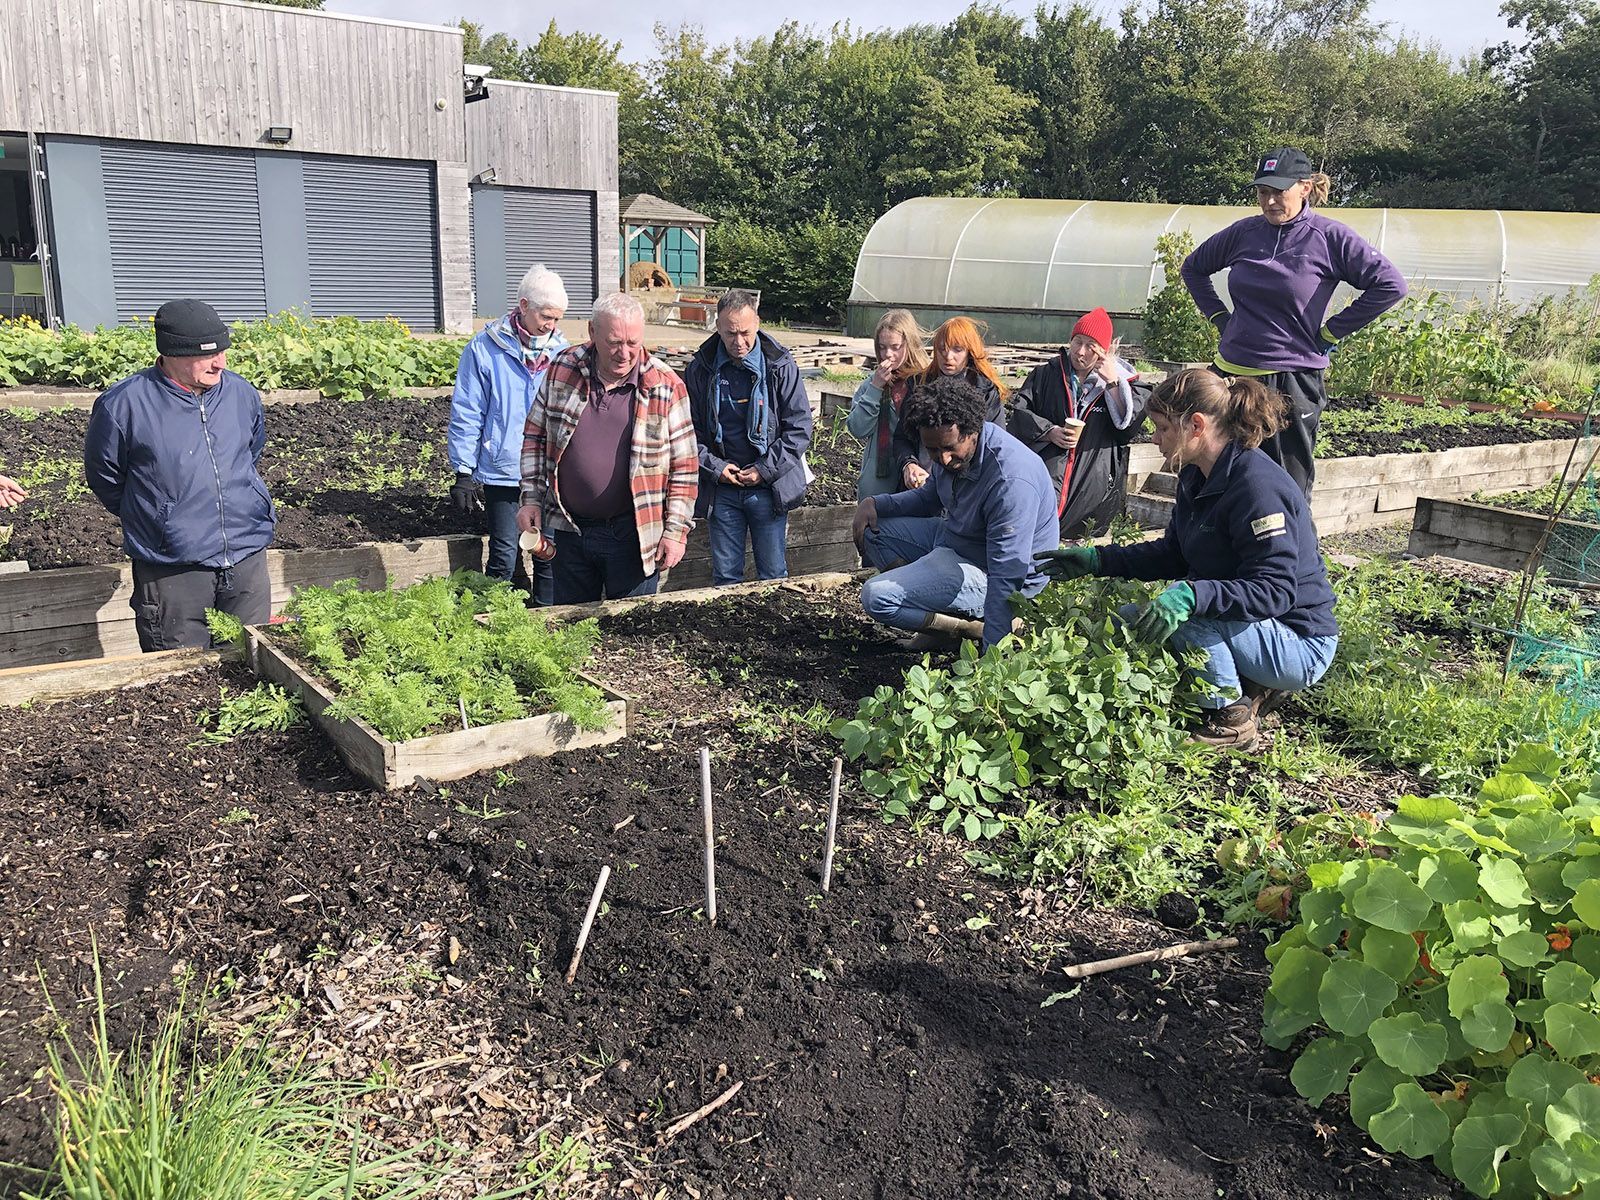 PUTTING DOWN ROOTS: Sharon McMaster working with community groups at the Colin Allotments